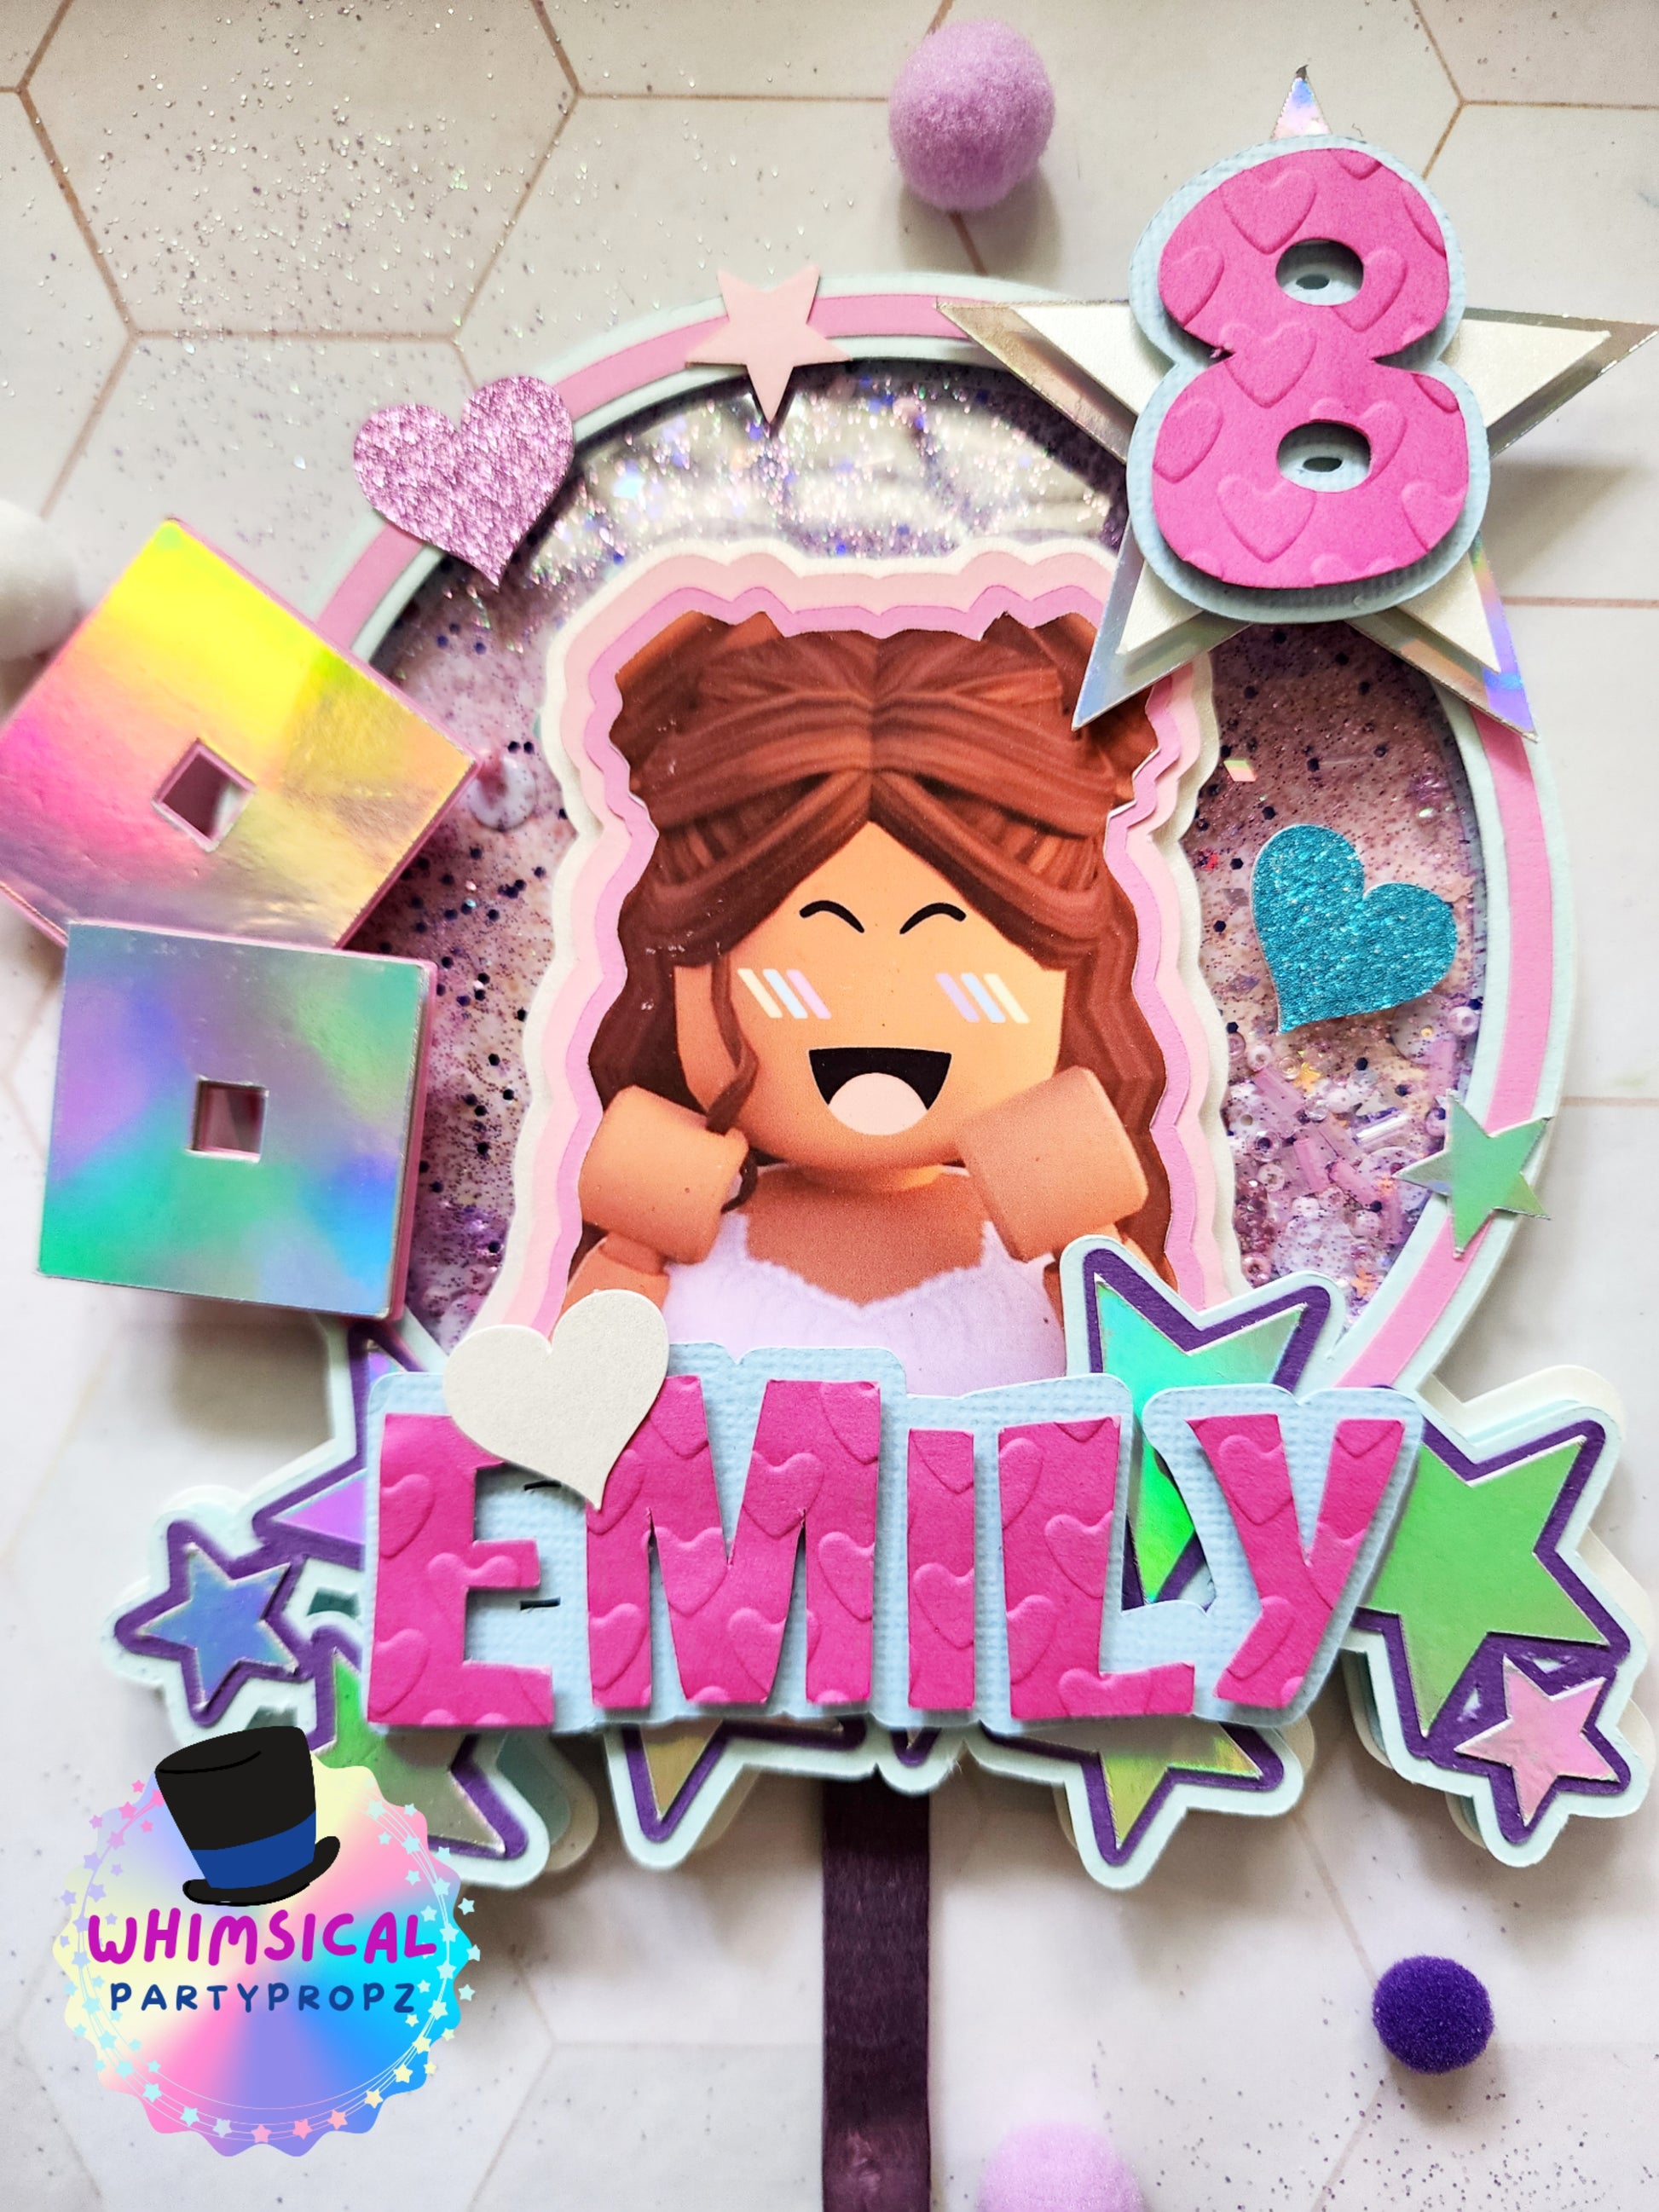 Girl Roblox Cake Topper Shipped to You Pink Roblox Birthday 